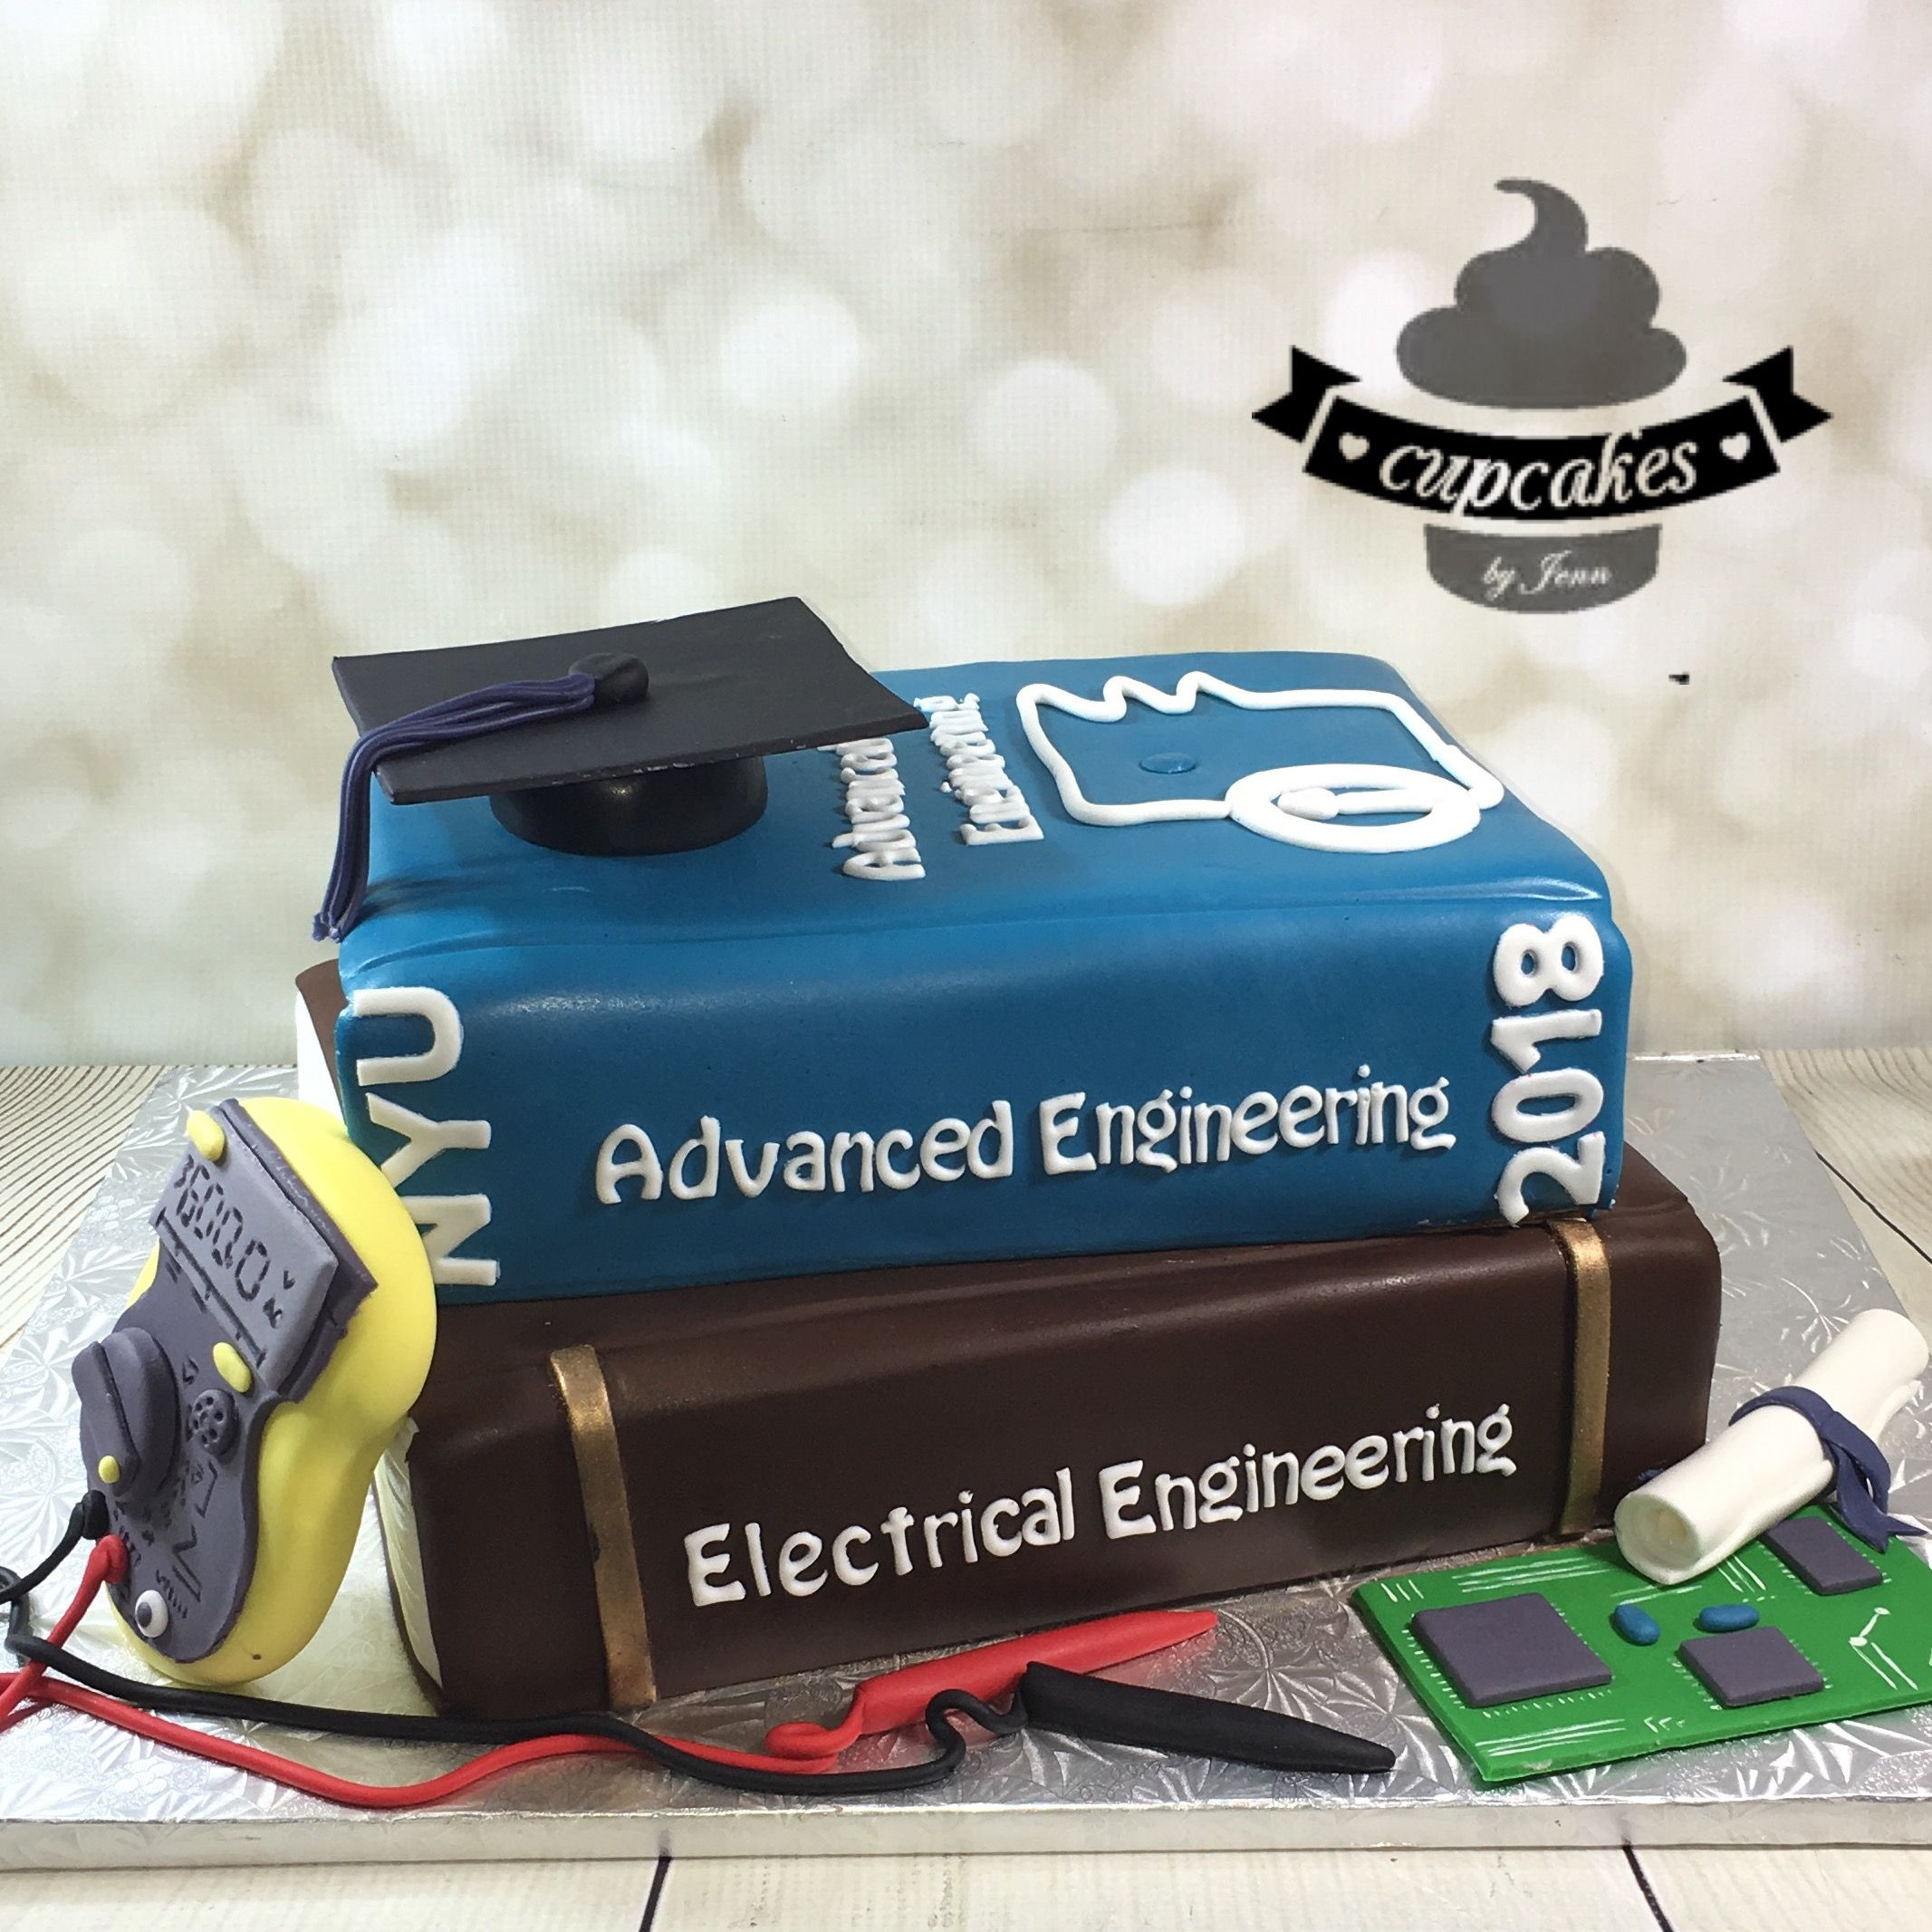 Electrical Engineering Graduation Party Ideas
 Engineering graduation cake